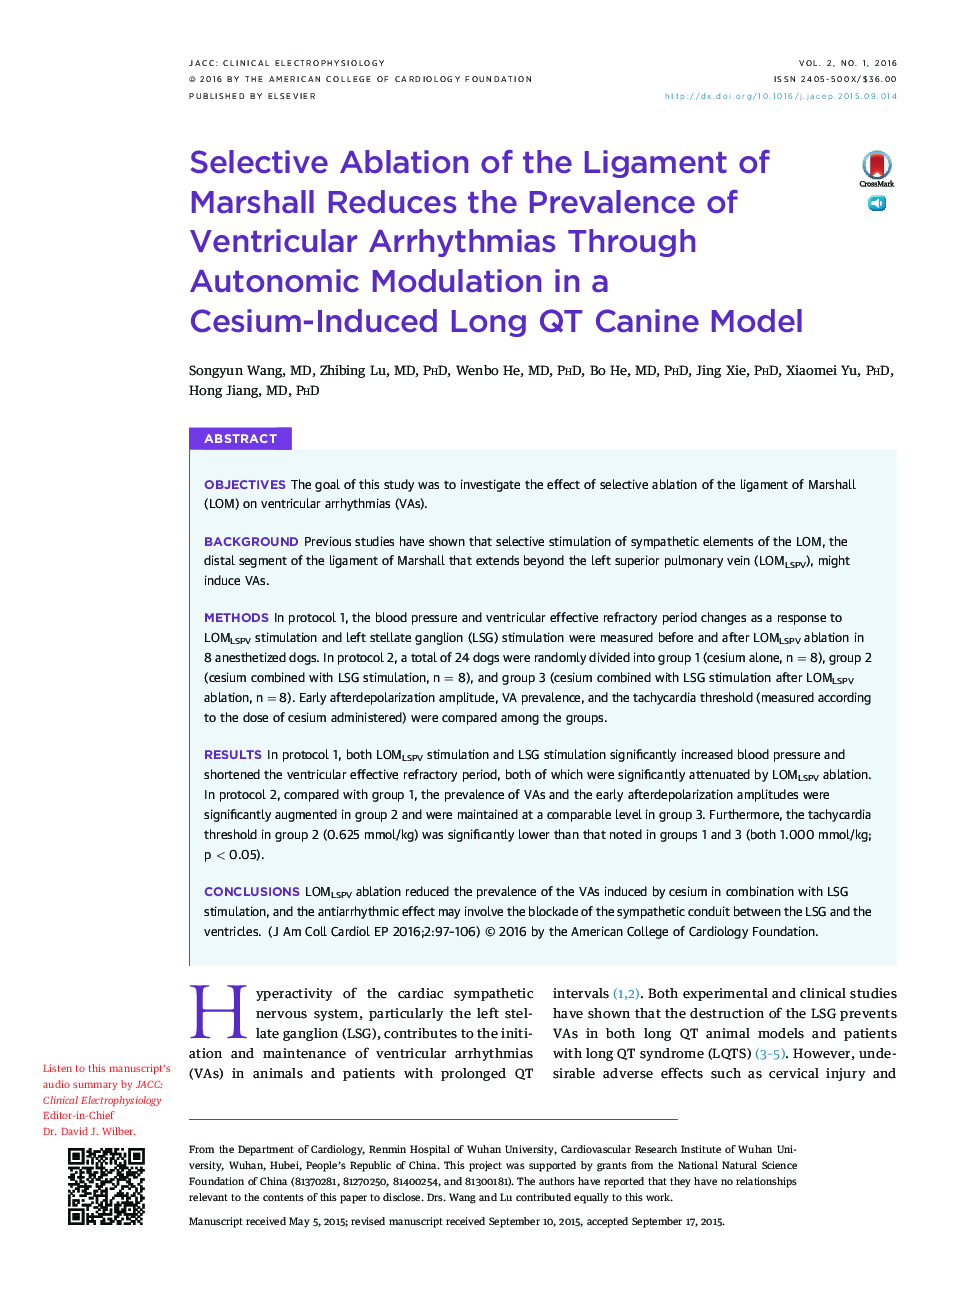 Selective Ablation of the Ligament of Marshall Reduces the Prevalence of Ventricular Arrhythmias Through Autonomic Modulation in a Cesium-Induced Long QT Canine Model 